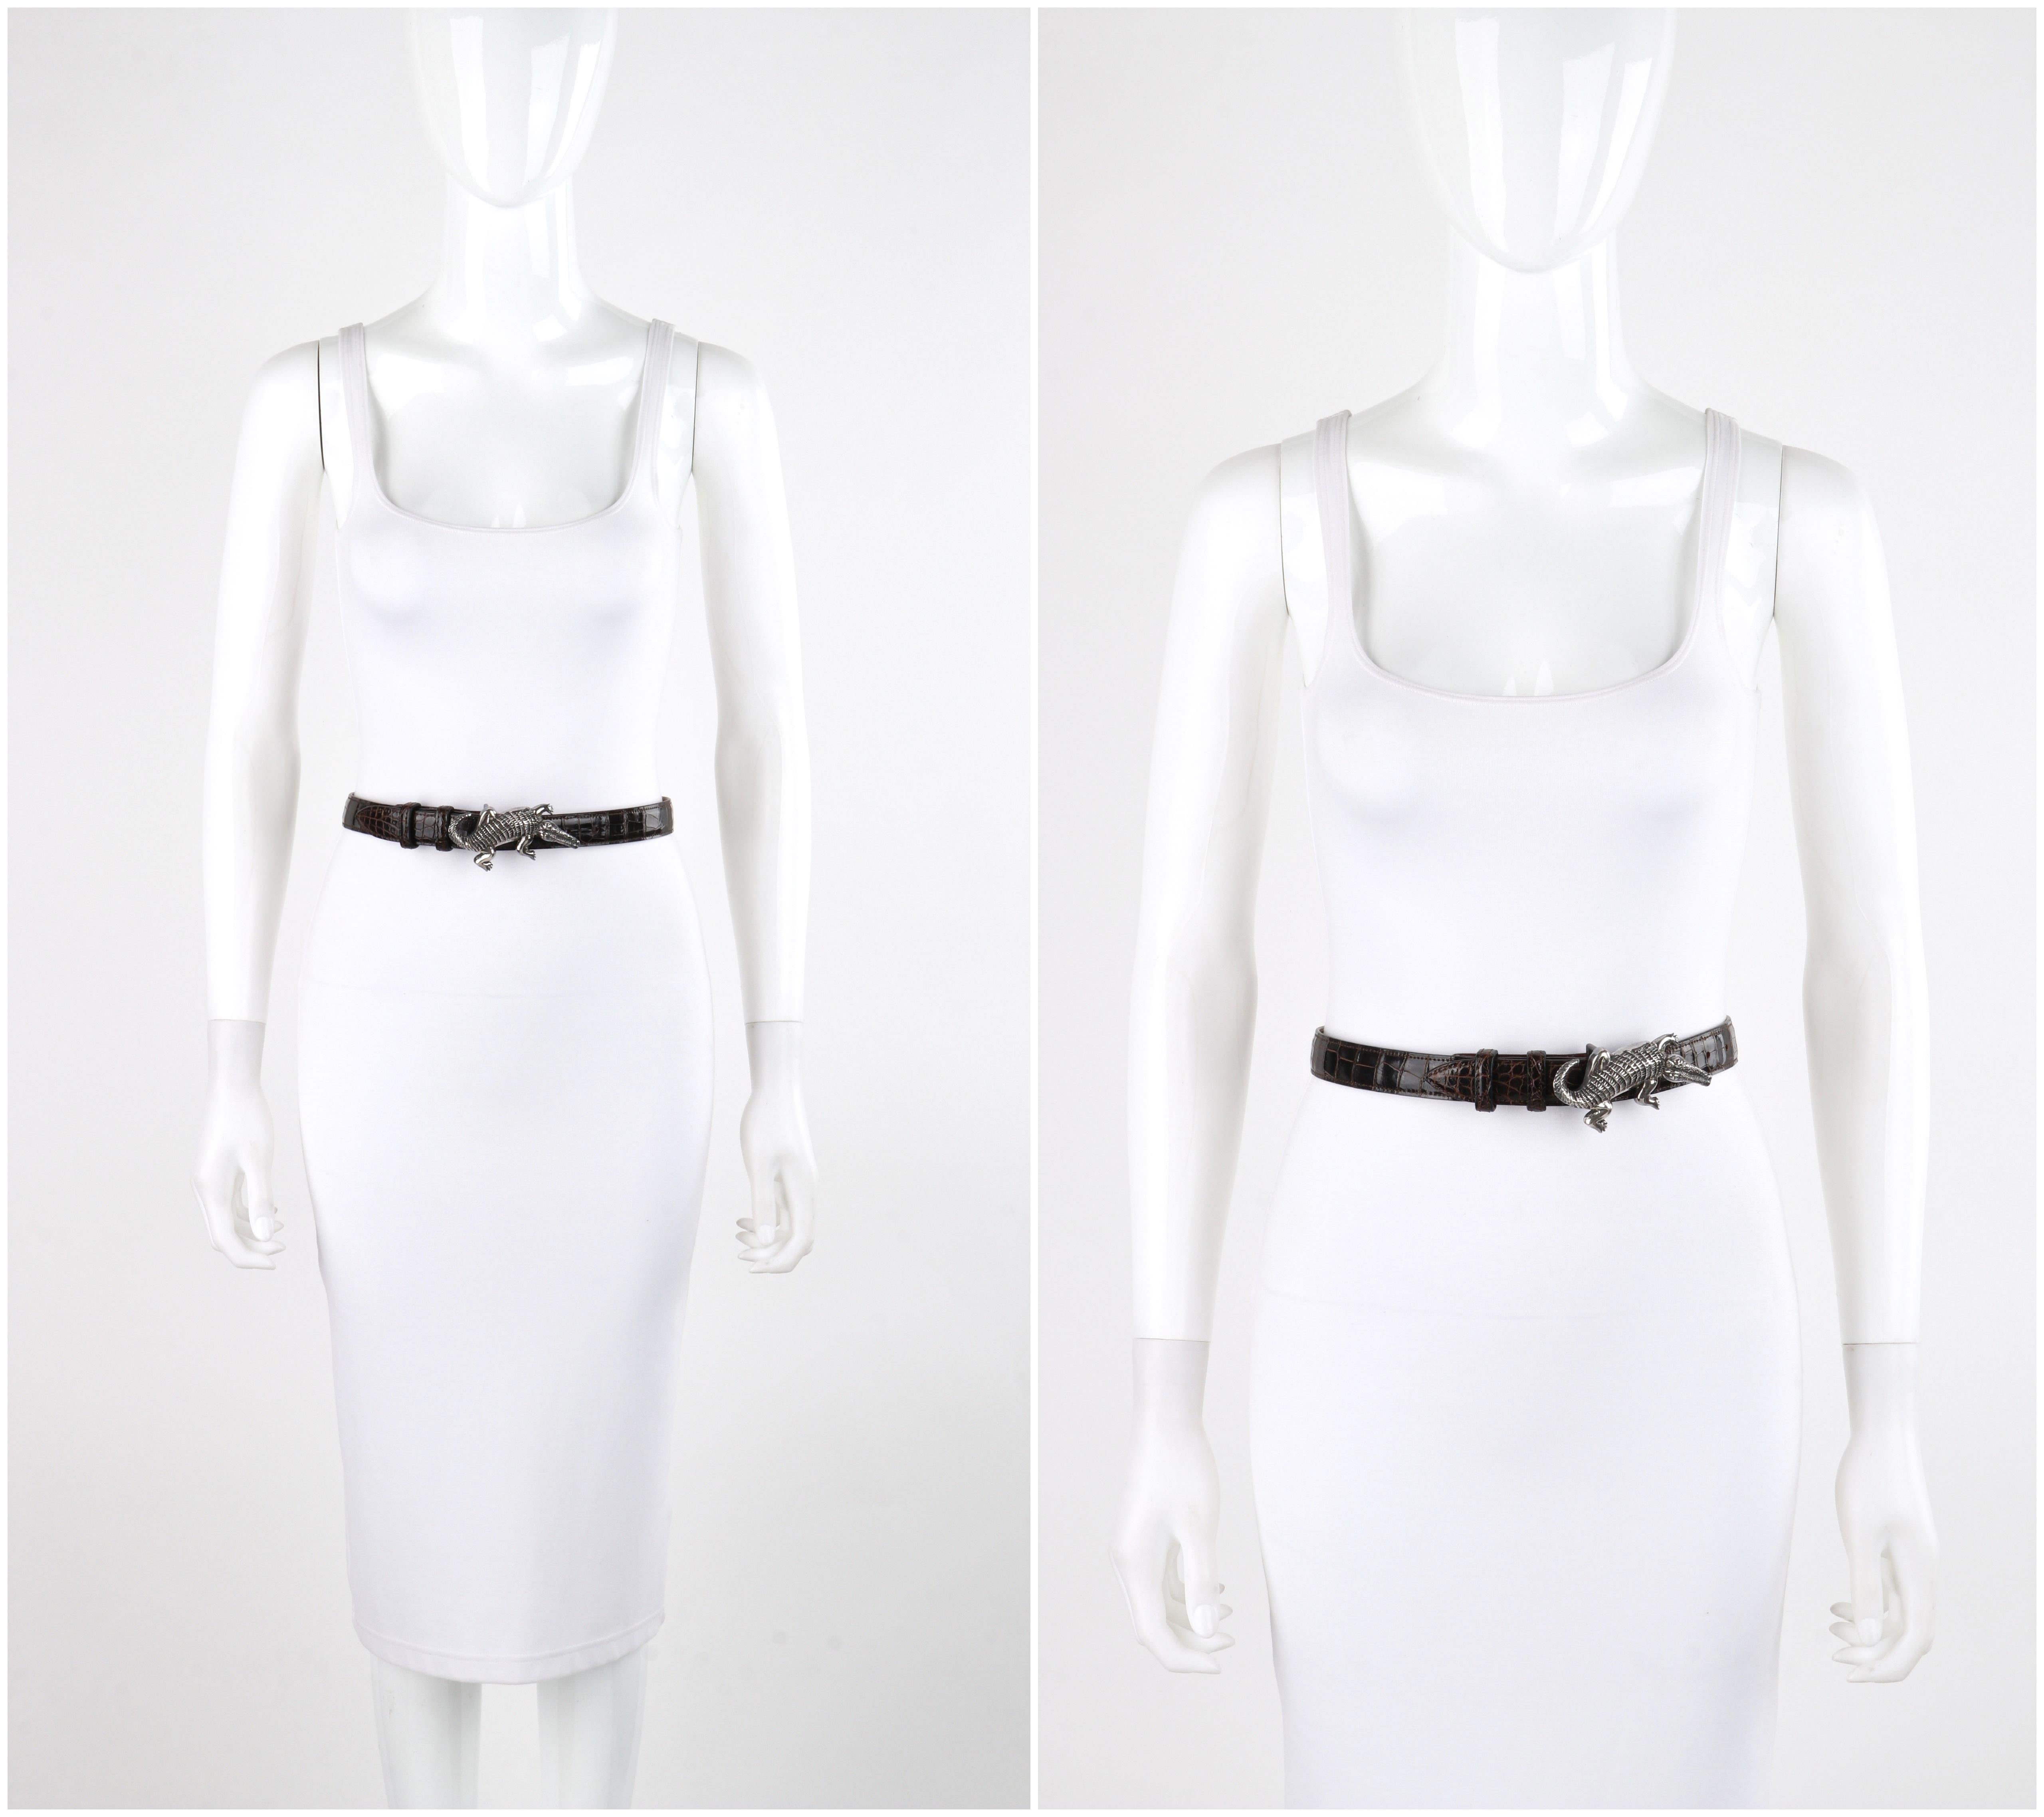 Brand / Manufacturer: Brenda Schoenfeld
Designer: Brenda Schoenfeld
Style: Belt
Color(s): Shades of brown, silver
Lined: No
Marked Fabric Content: 